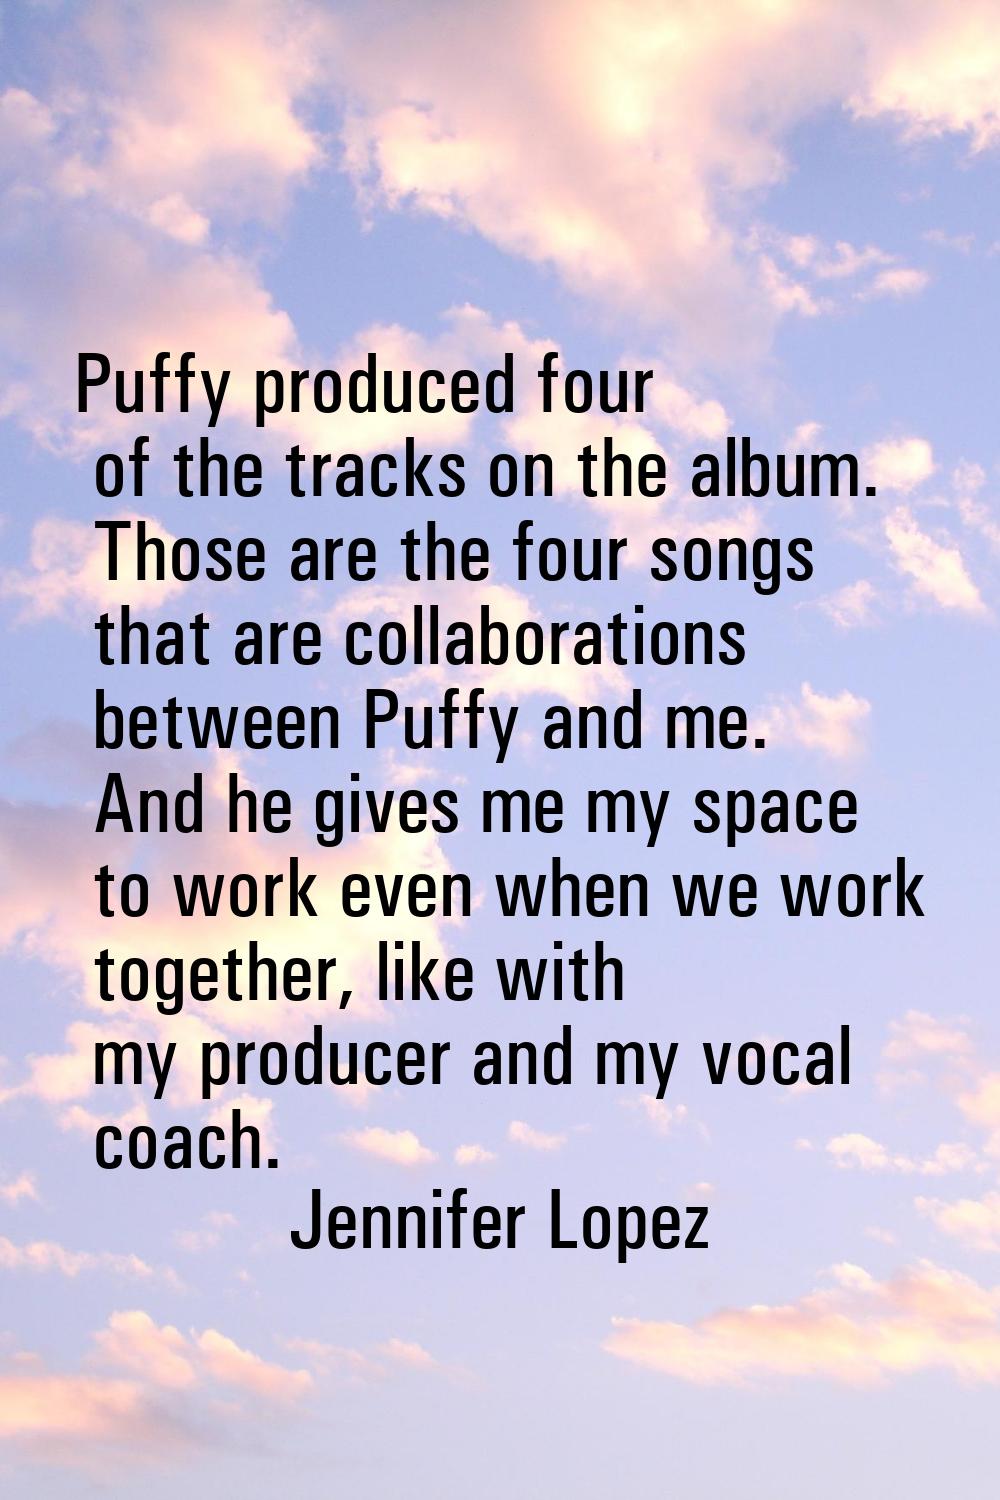 Puffy produced four of the tracks on the album. Those are the four songs that are collaborations be